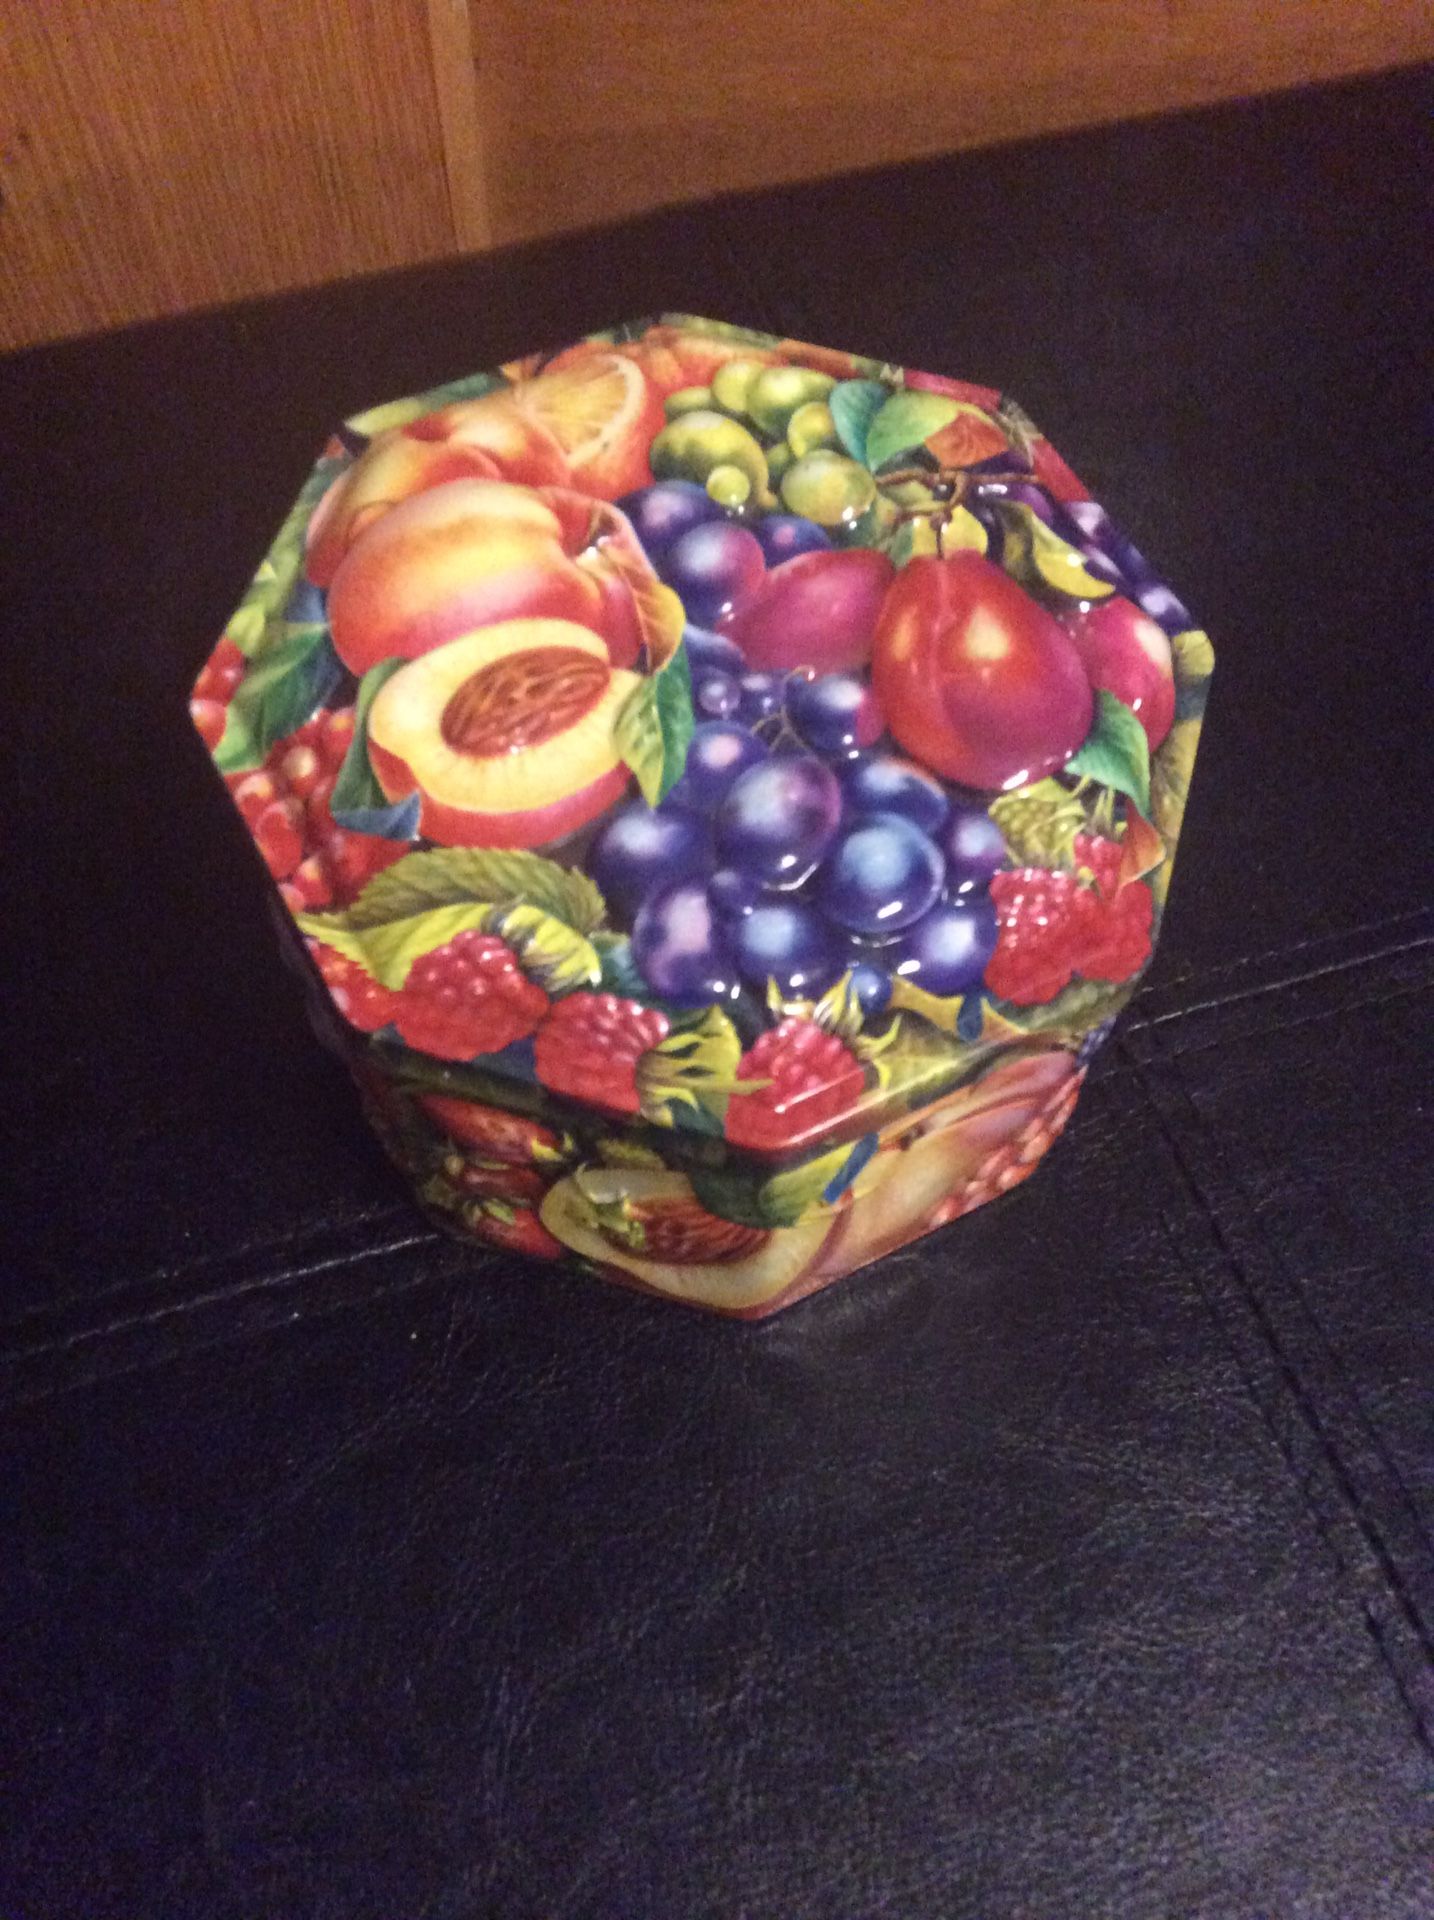 Decorative canister